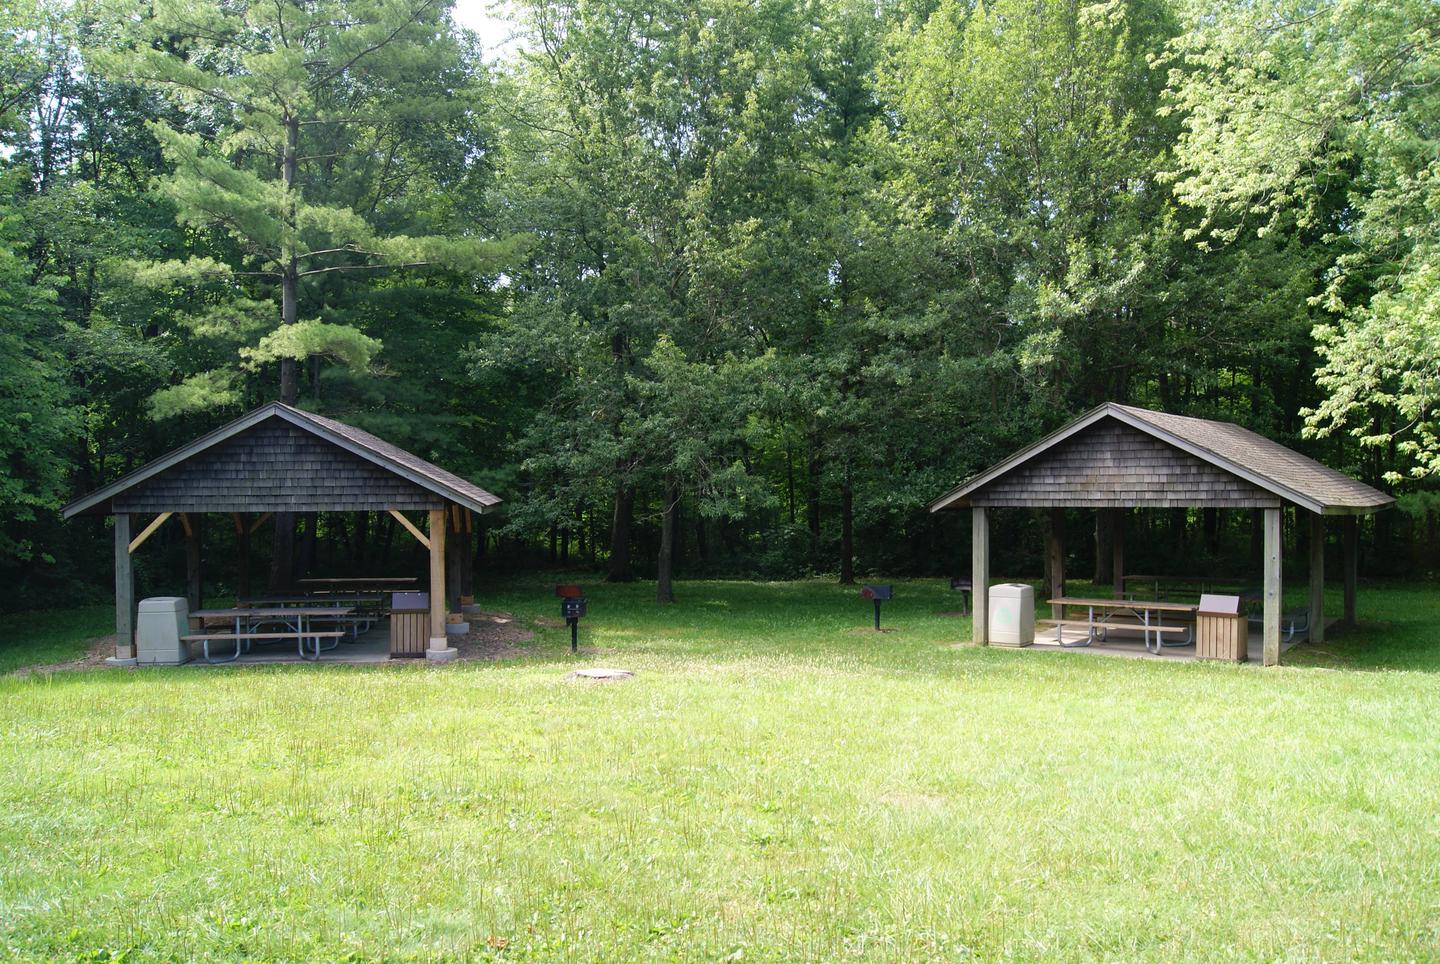 Chellberg Farm Picnic Shelter 2 and 3Shelters 2 and 3 next to each other.